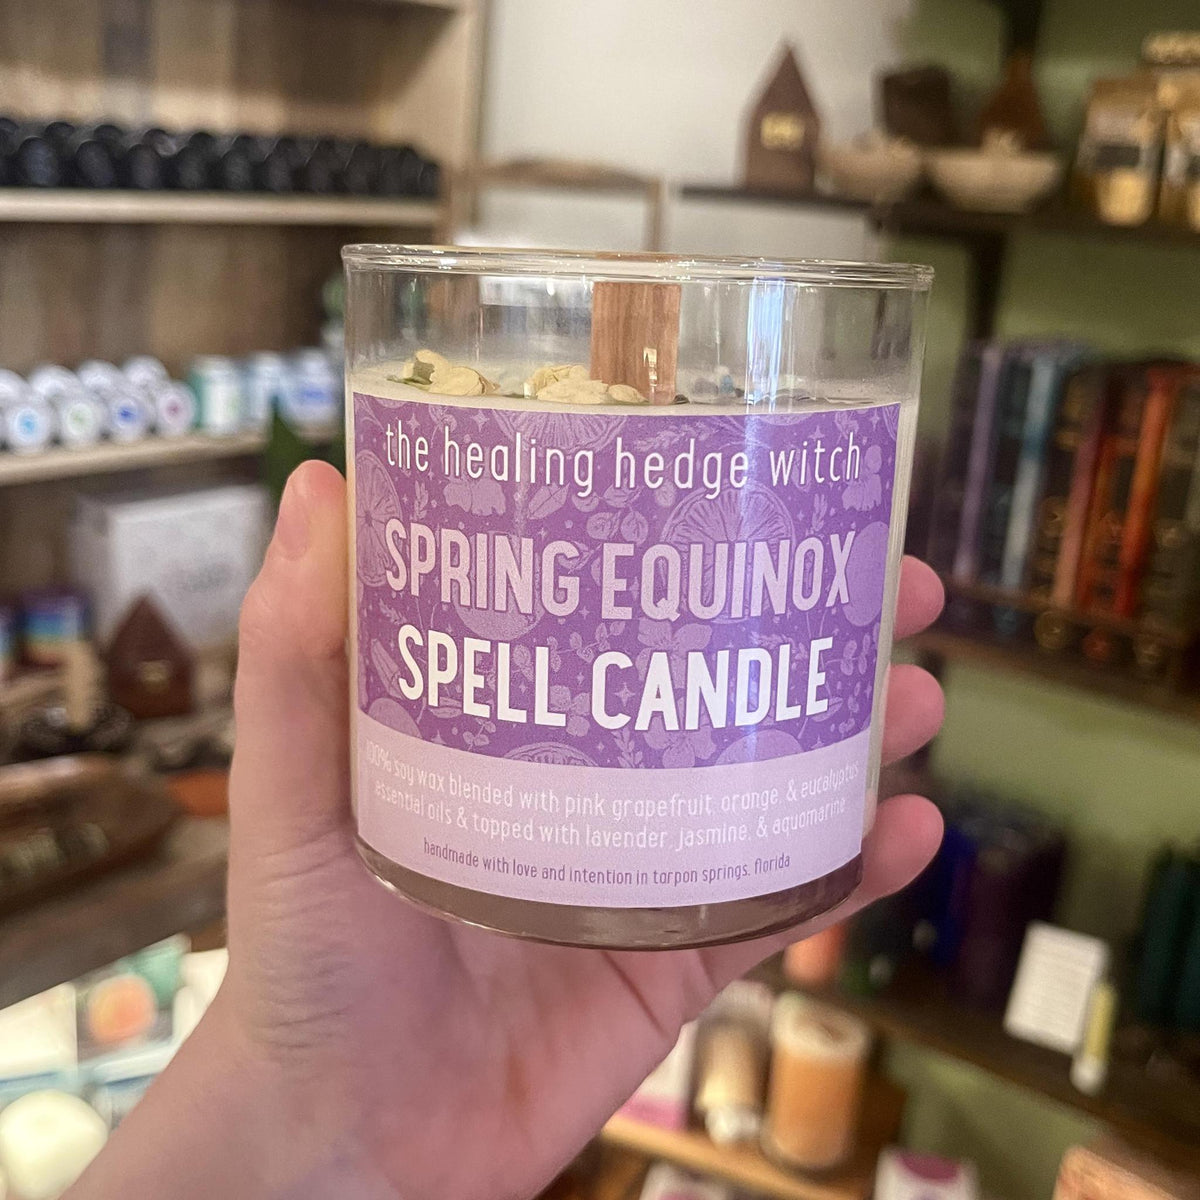 Spring Equinox Spell Candle